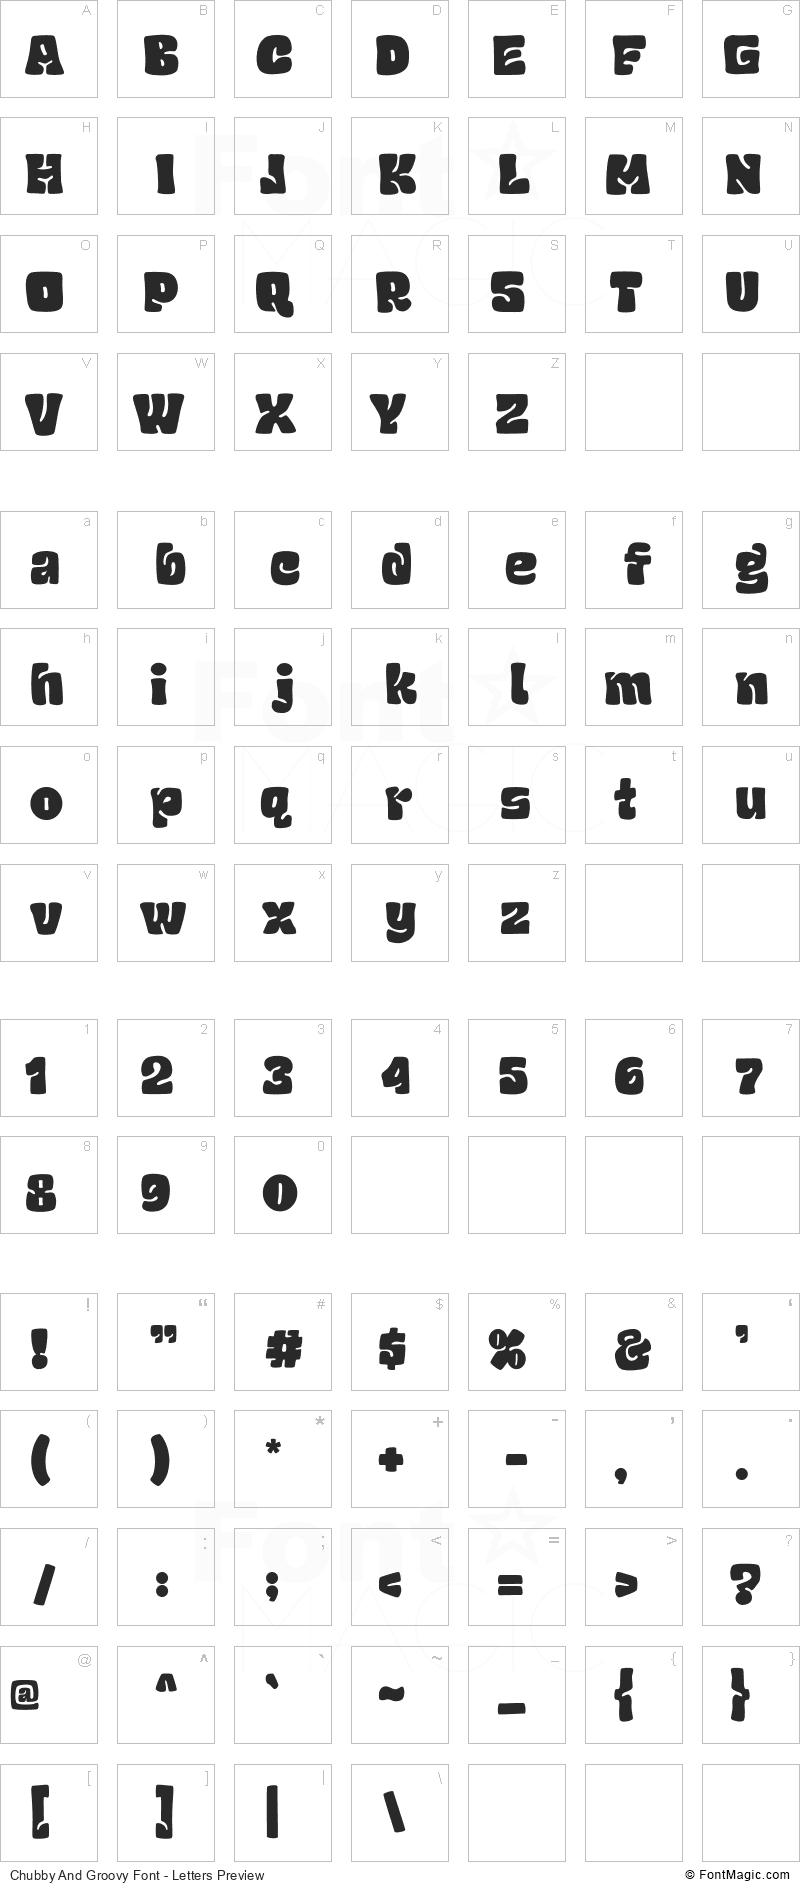 Chubby And Groovy Font - All Latters Preview Chart